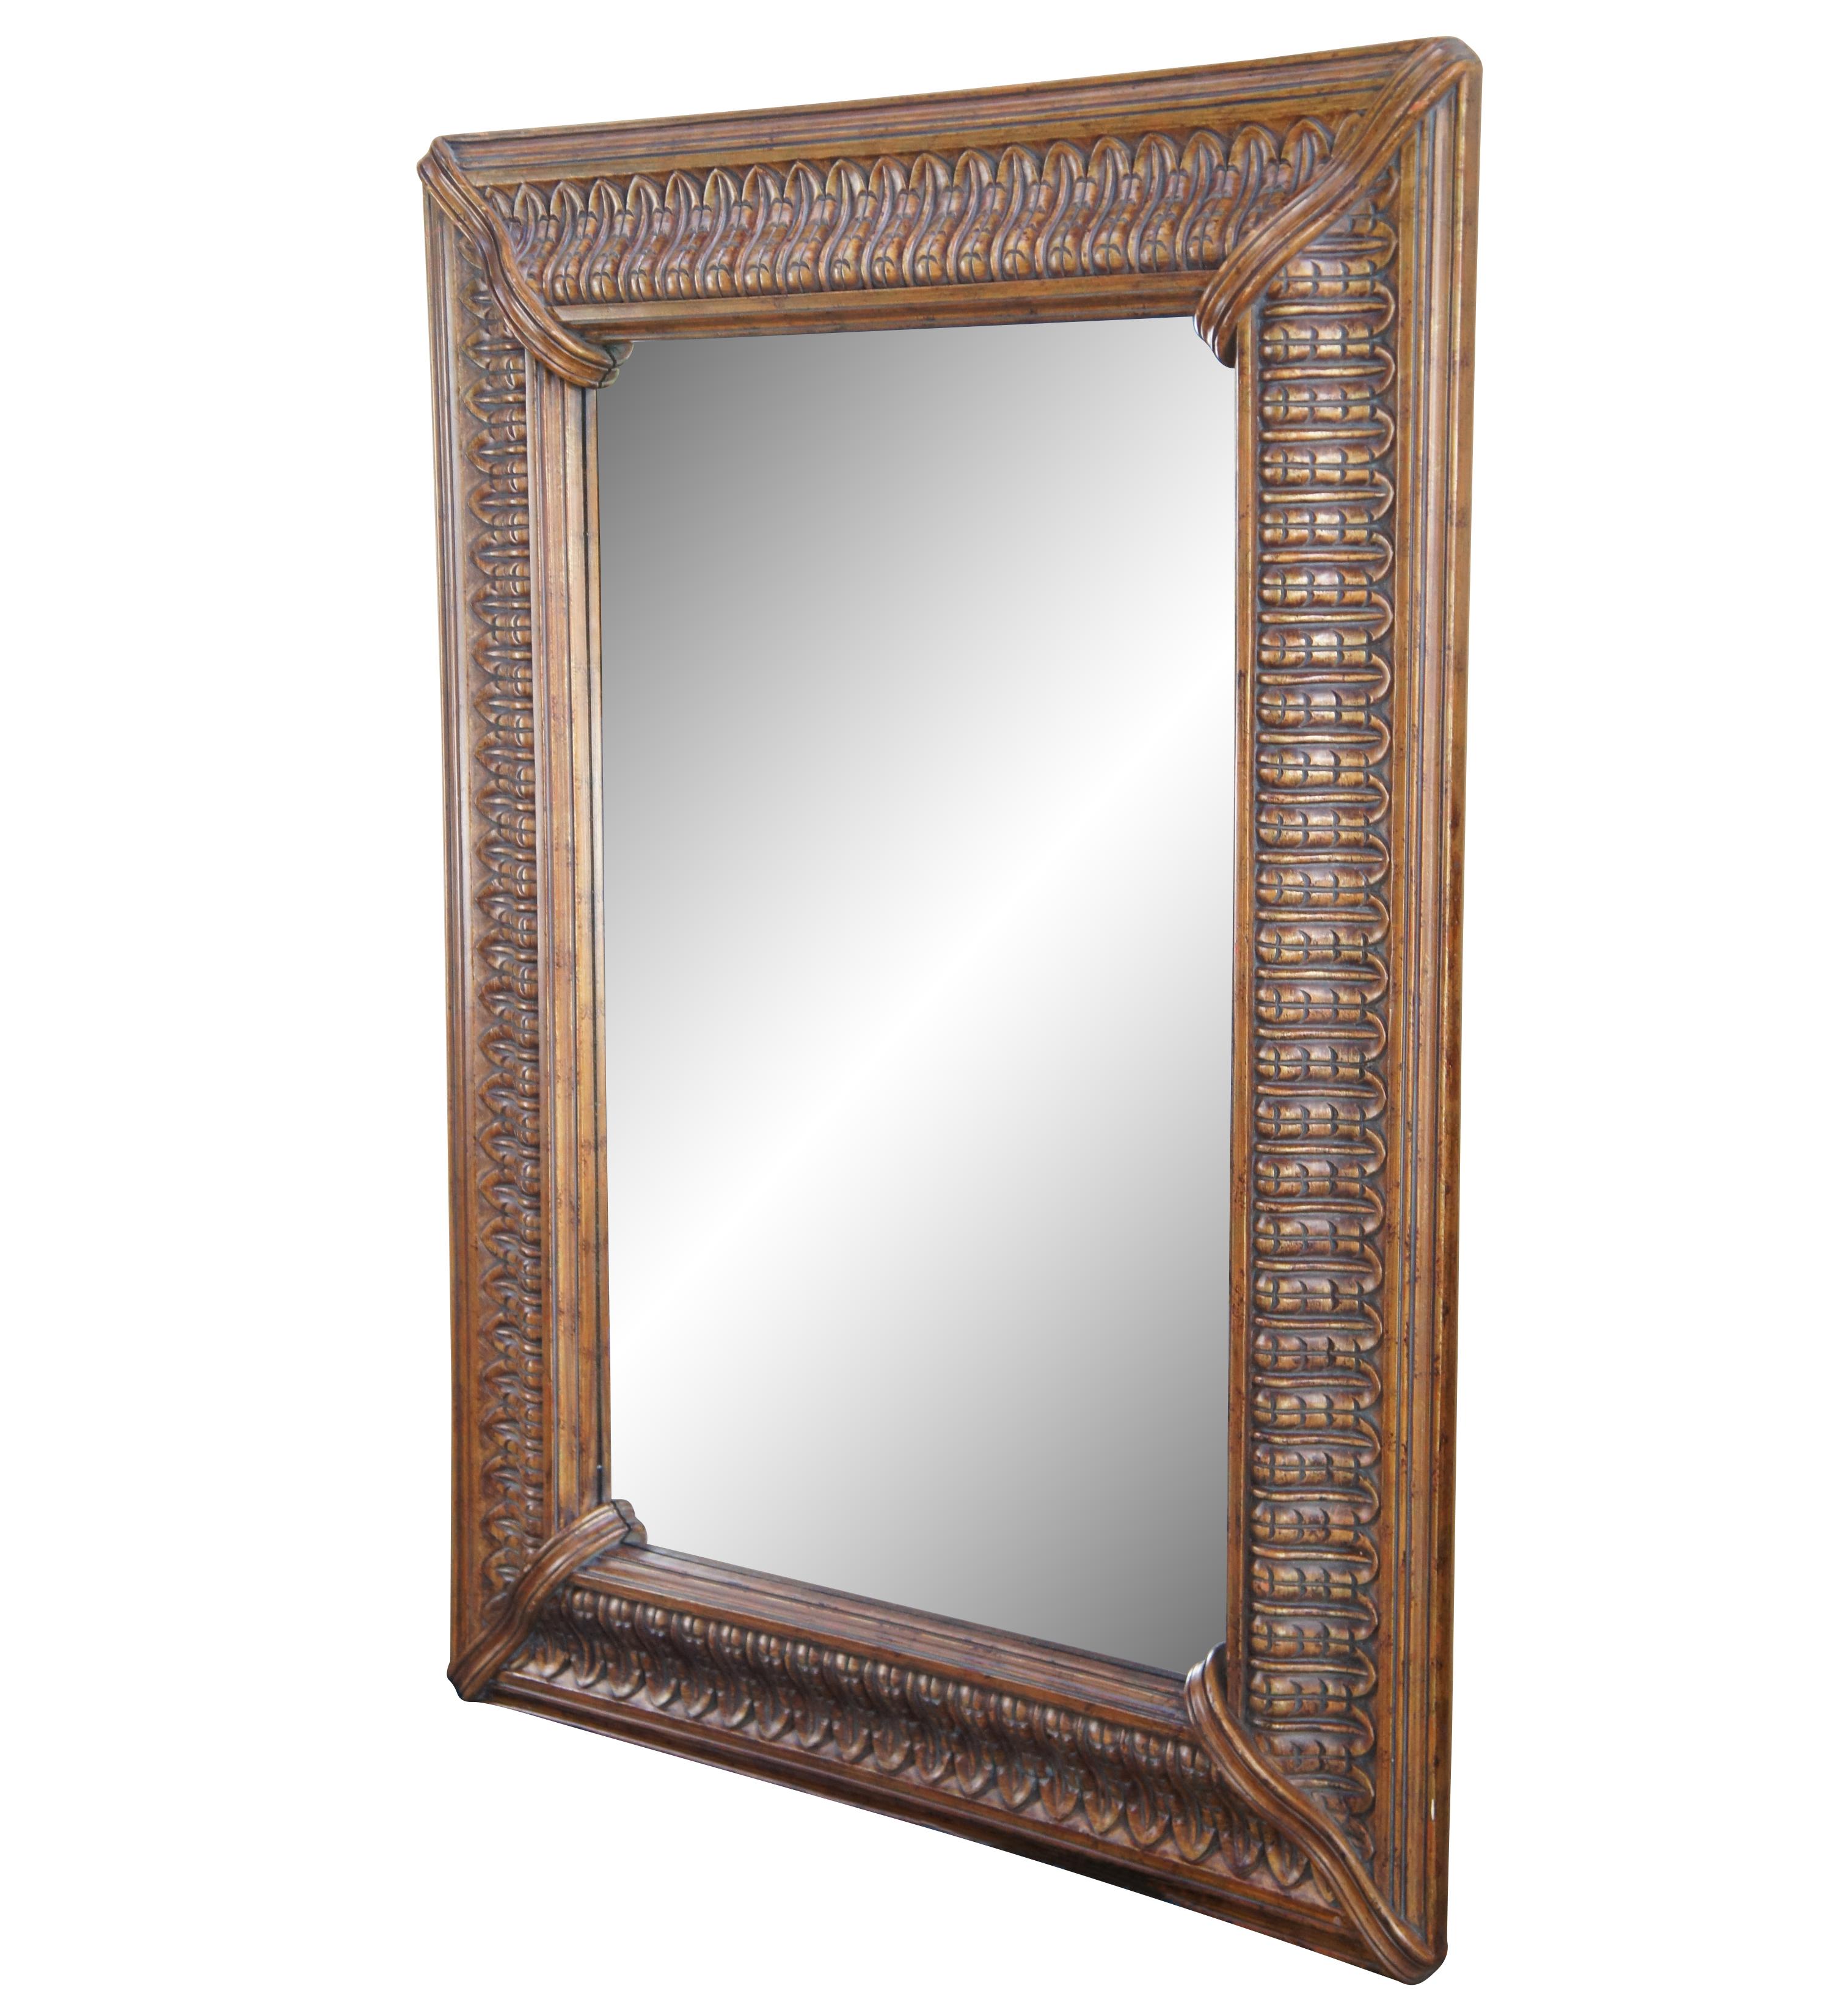 Vintage Raschella Collection beveled vanity or mantel mirror featuring an ornate pecan wood frame. Set up for vertical or horizontal hanging.

Raschella Collection Inc, founded in 1999, is an importer based in Pico Rivera California that